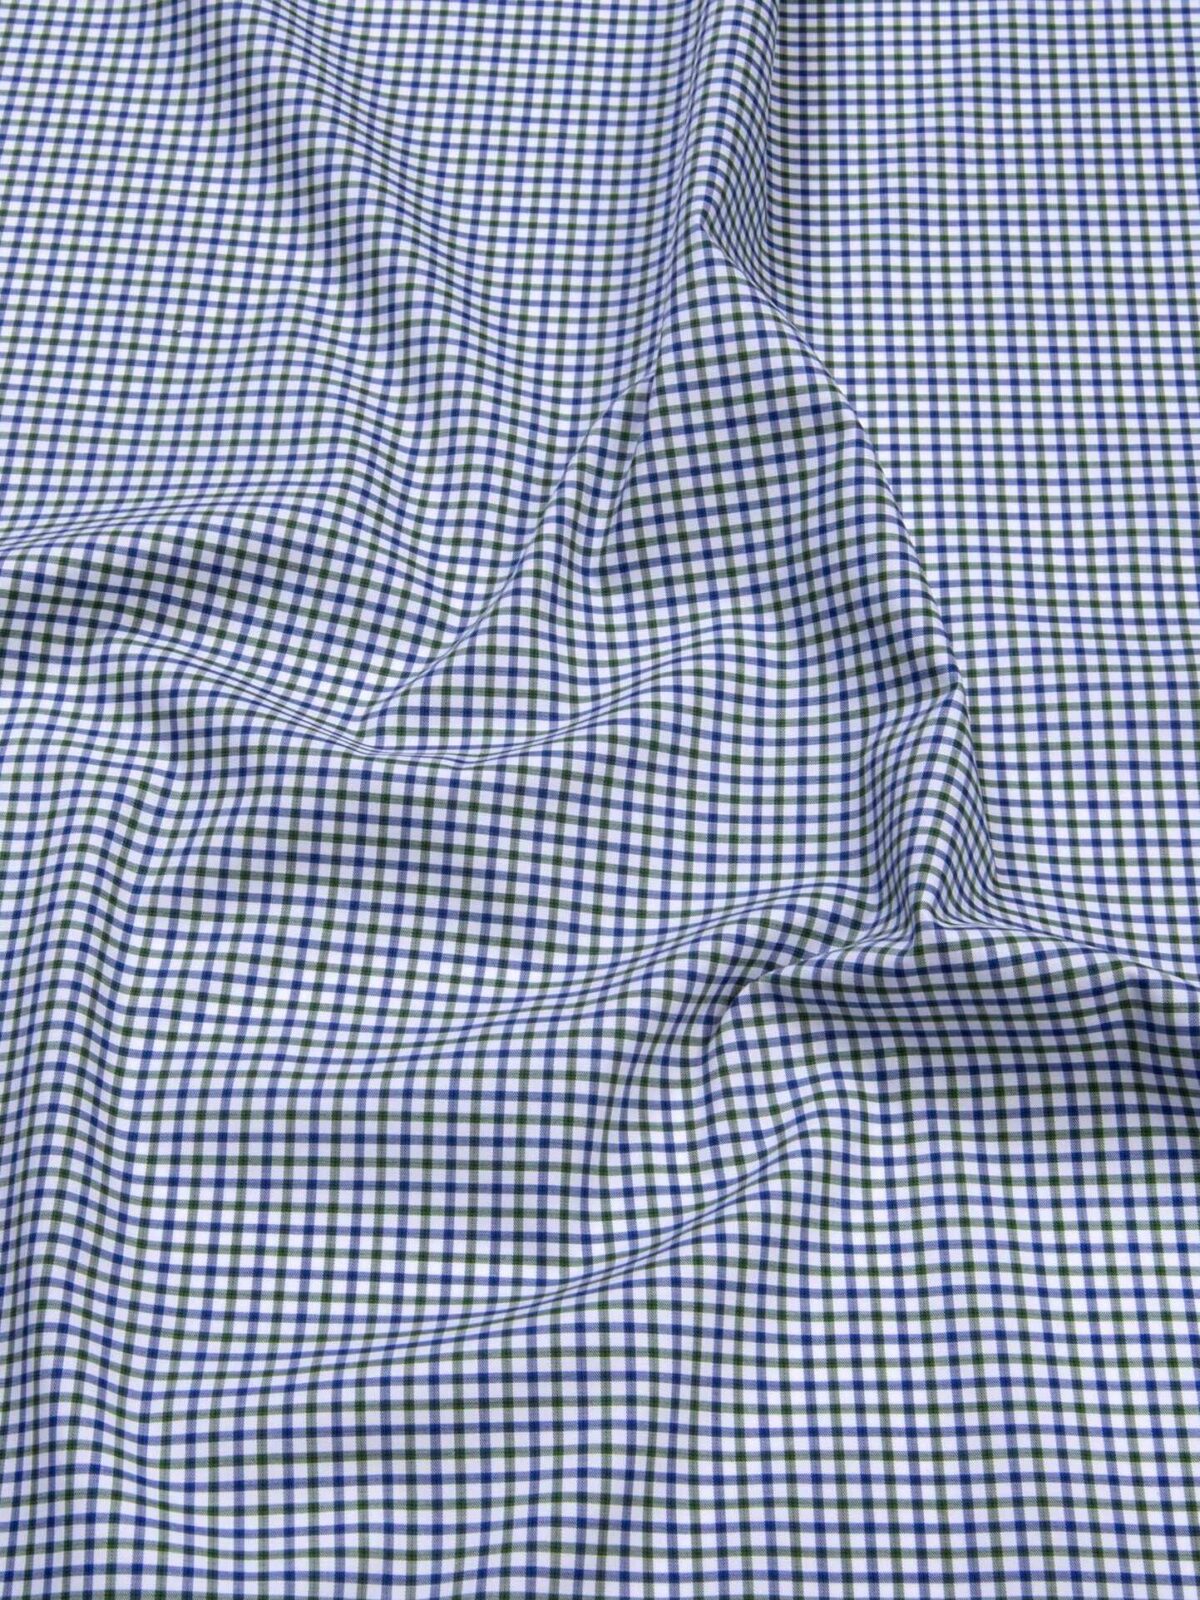 William Green and Blue Tattersall Shirts by Proper Cloth